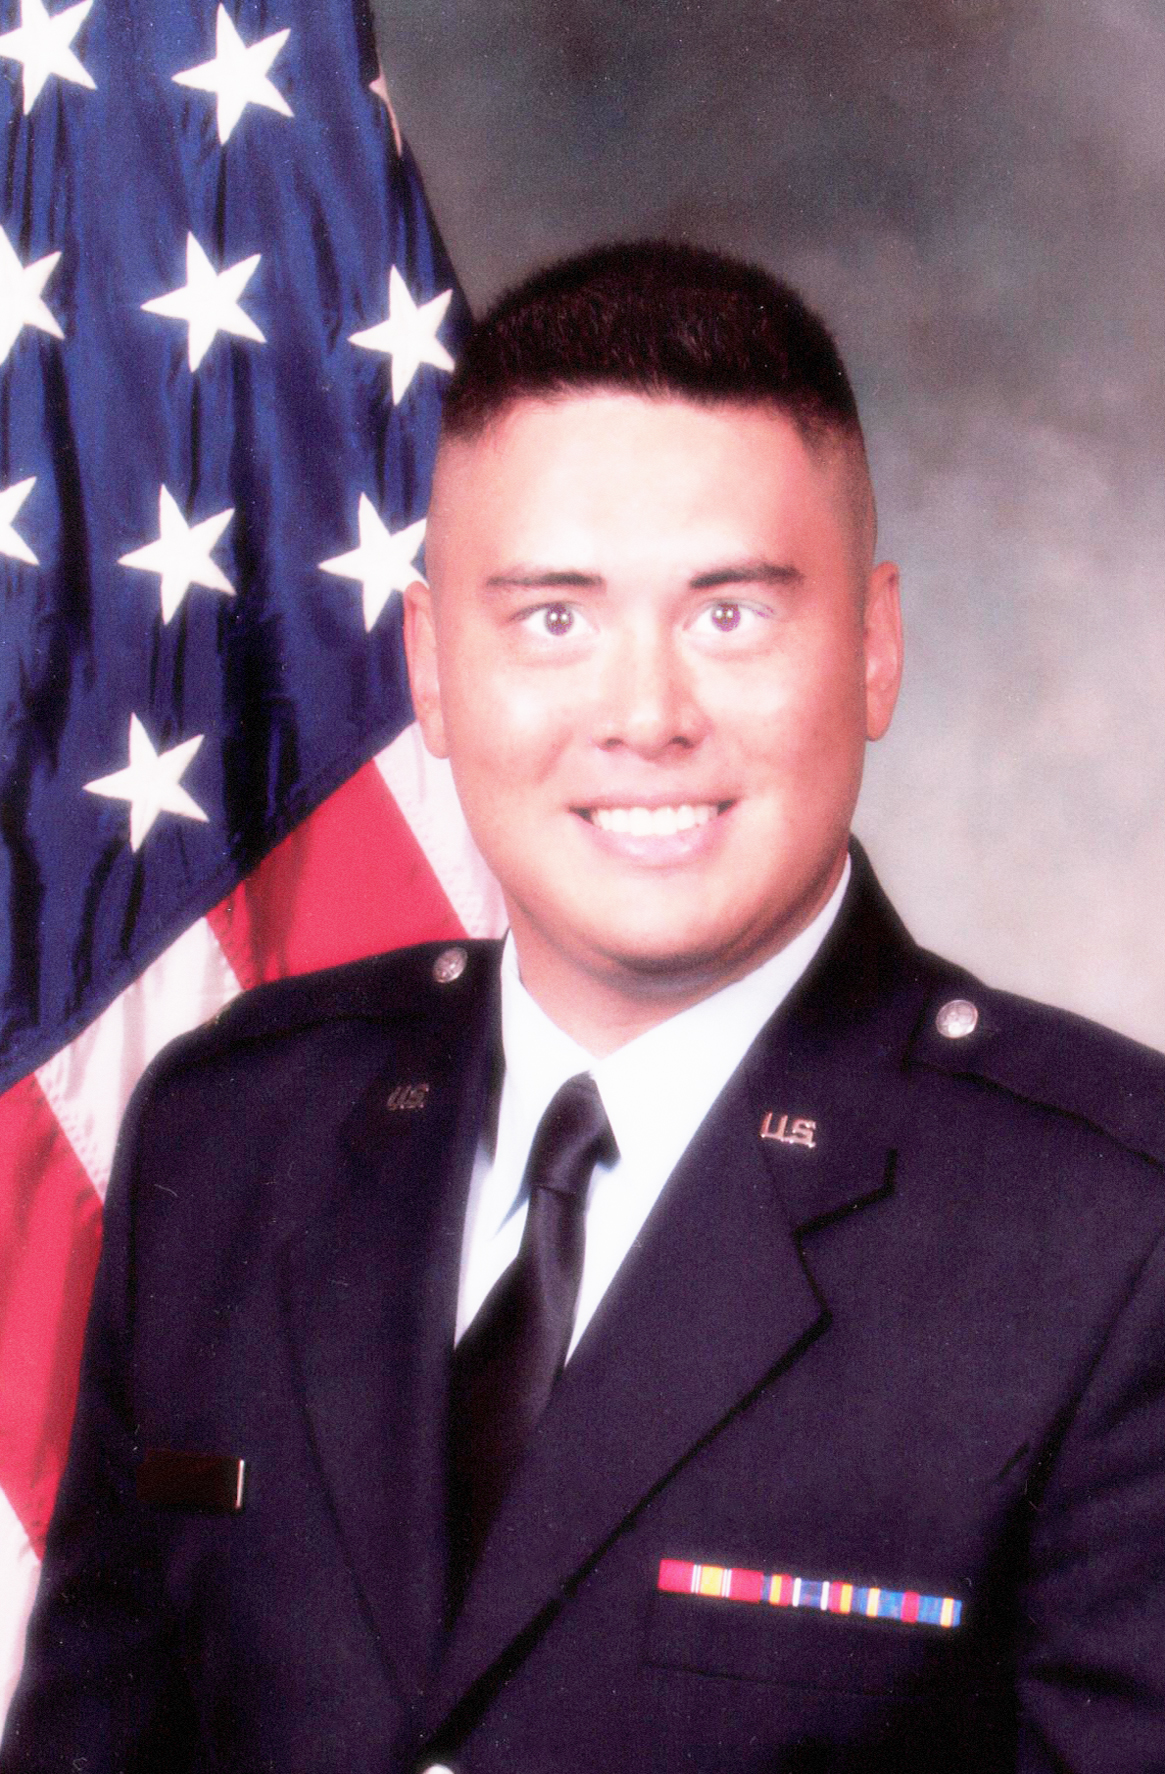 Baltimore, Maryland native Sean Sutherland served as an Air Force officer in charge of 42 airmen, and later volunteered to deploy to Afghanistan.